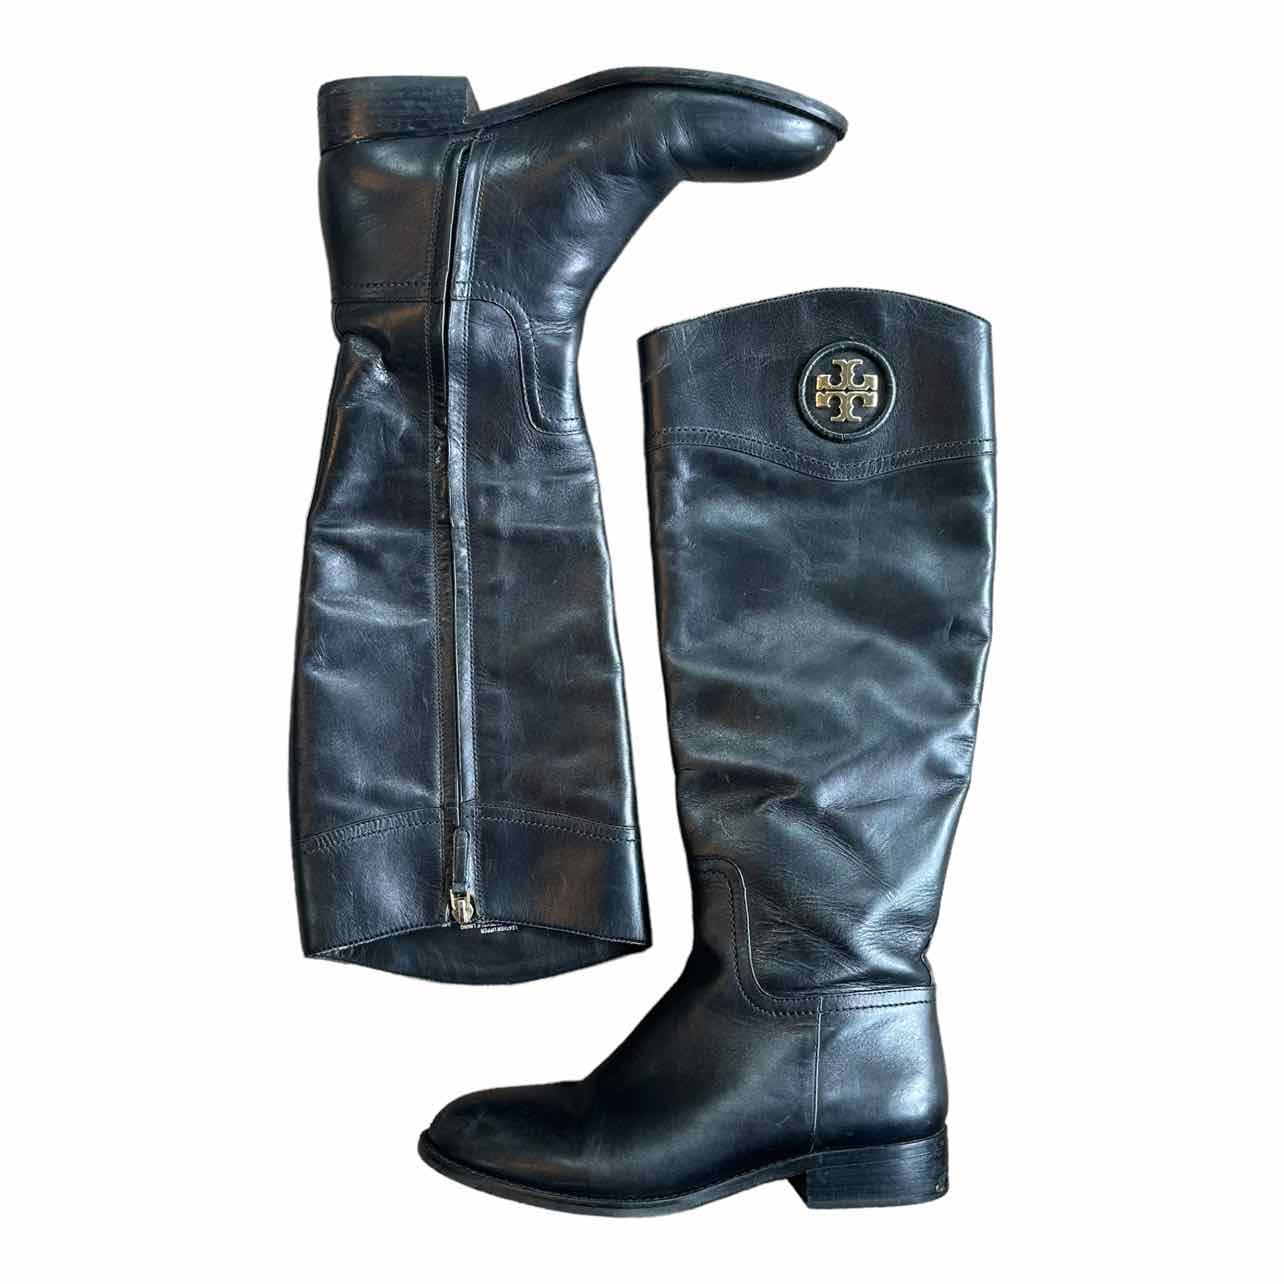 Tory Burch SIZE 8 Boots